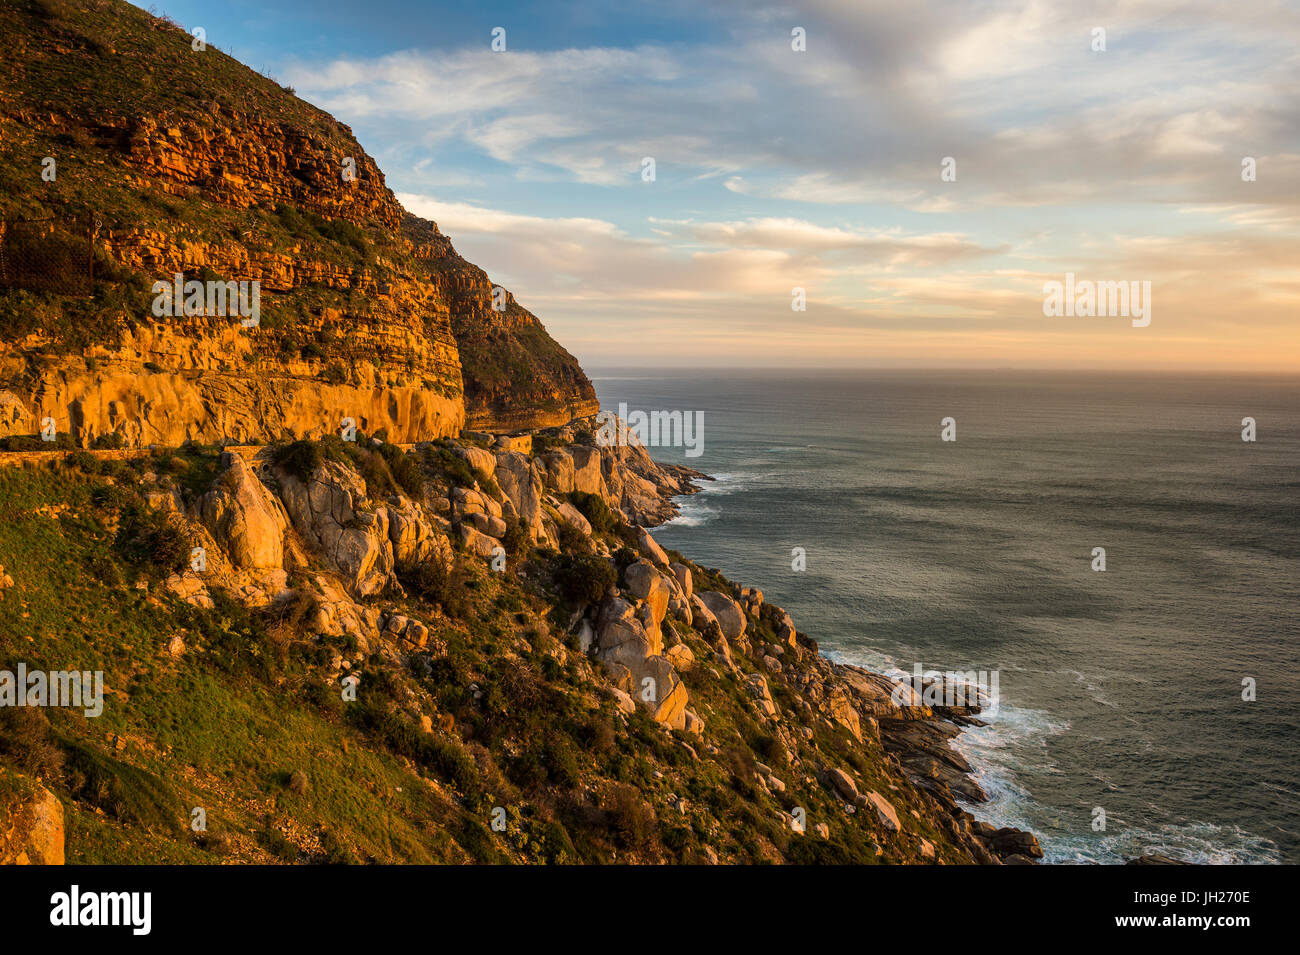 Cliffs of Cape of Good Hope at sunset, South Africa, Africa Stock Photo